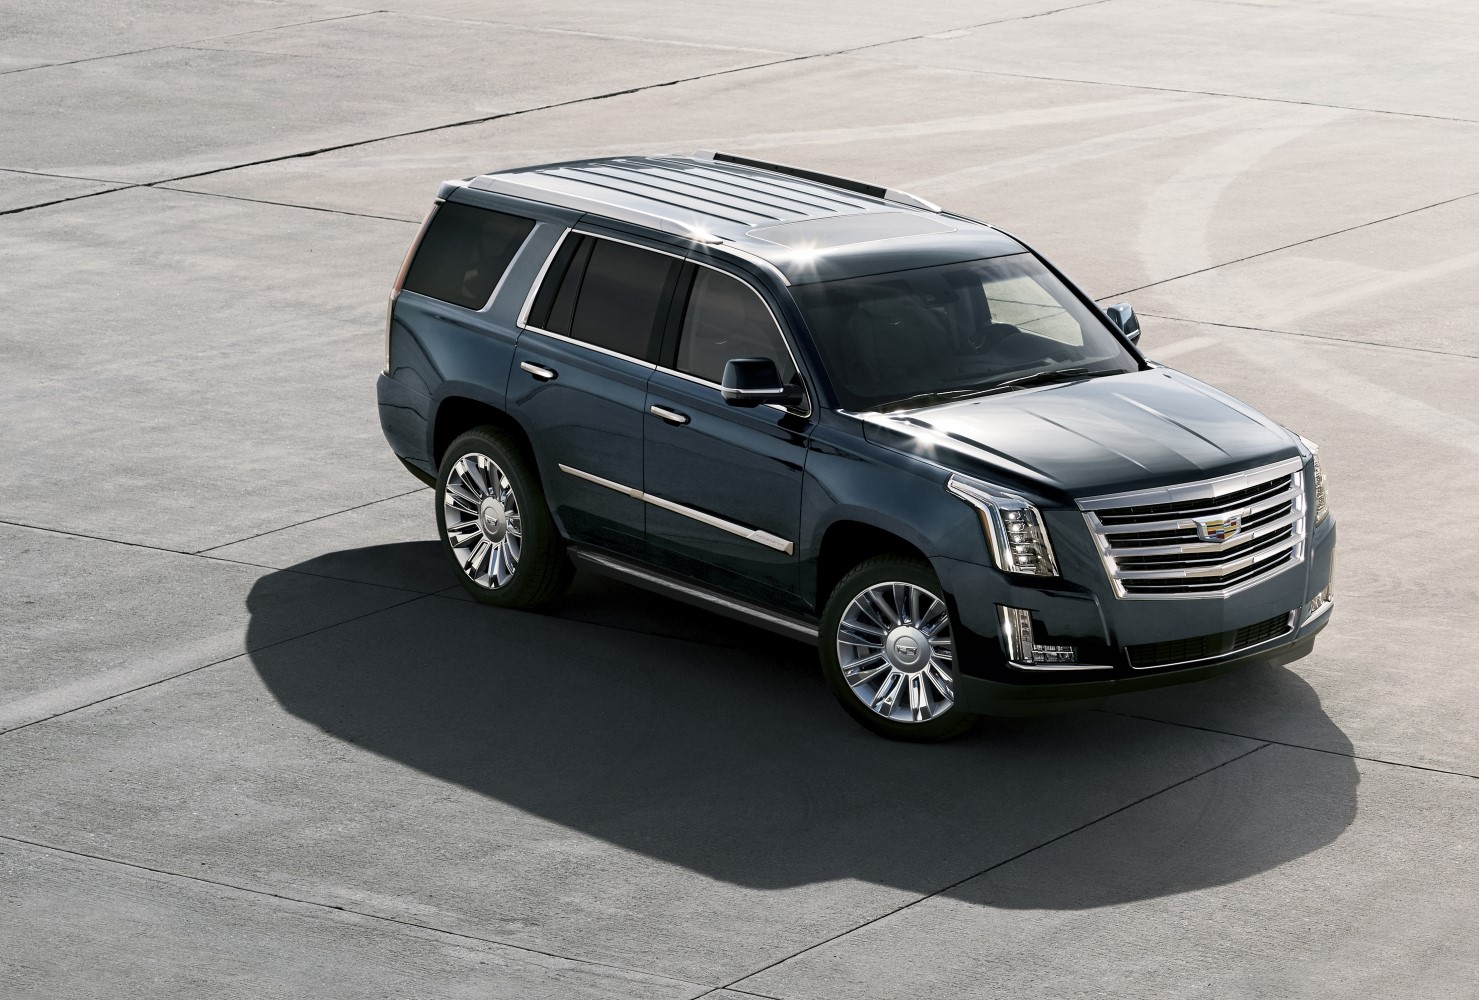 2019 Cadillac Escalade SUV Specs, Review, and Pricing | CarSession